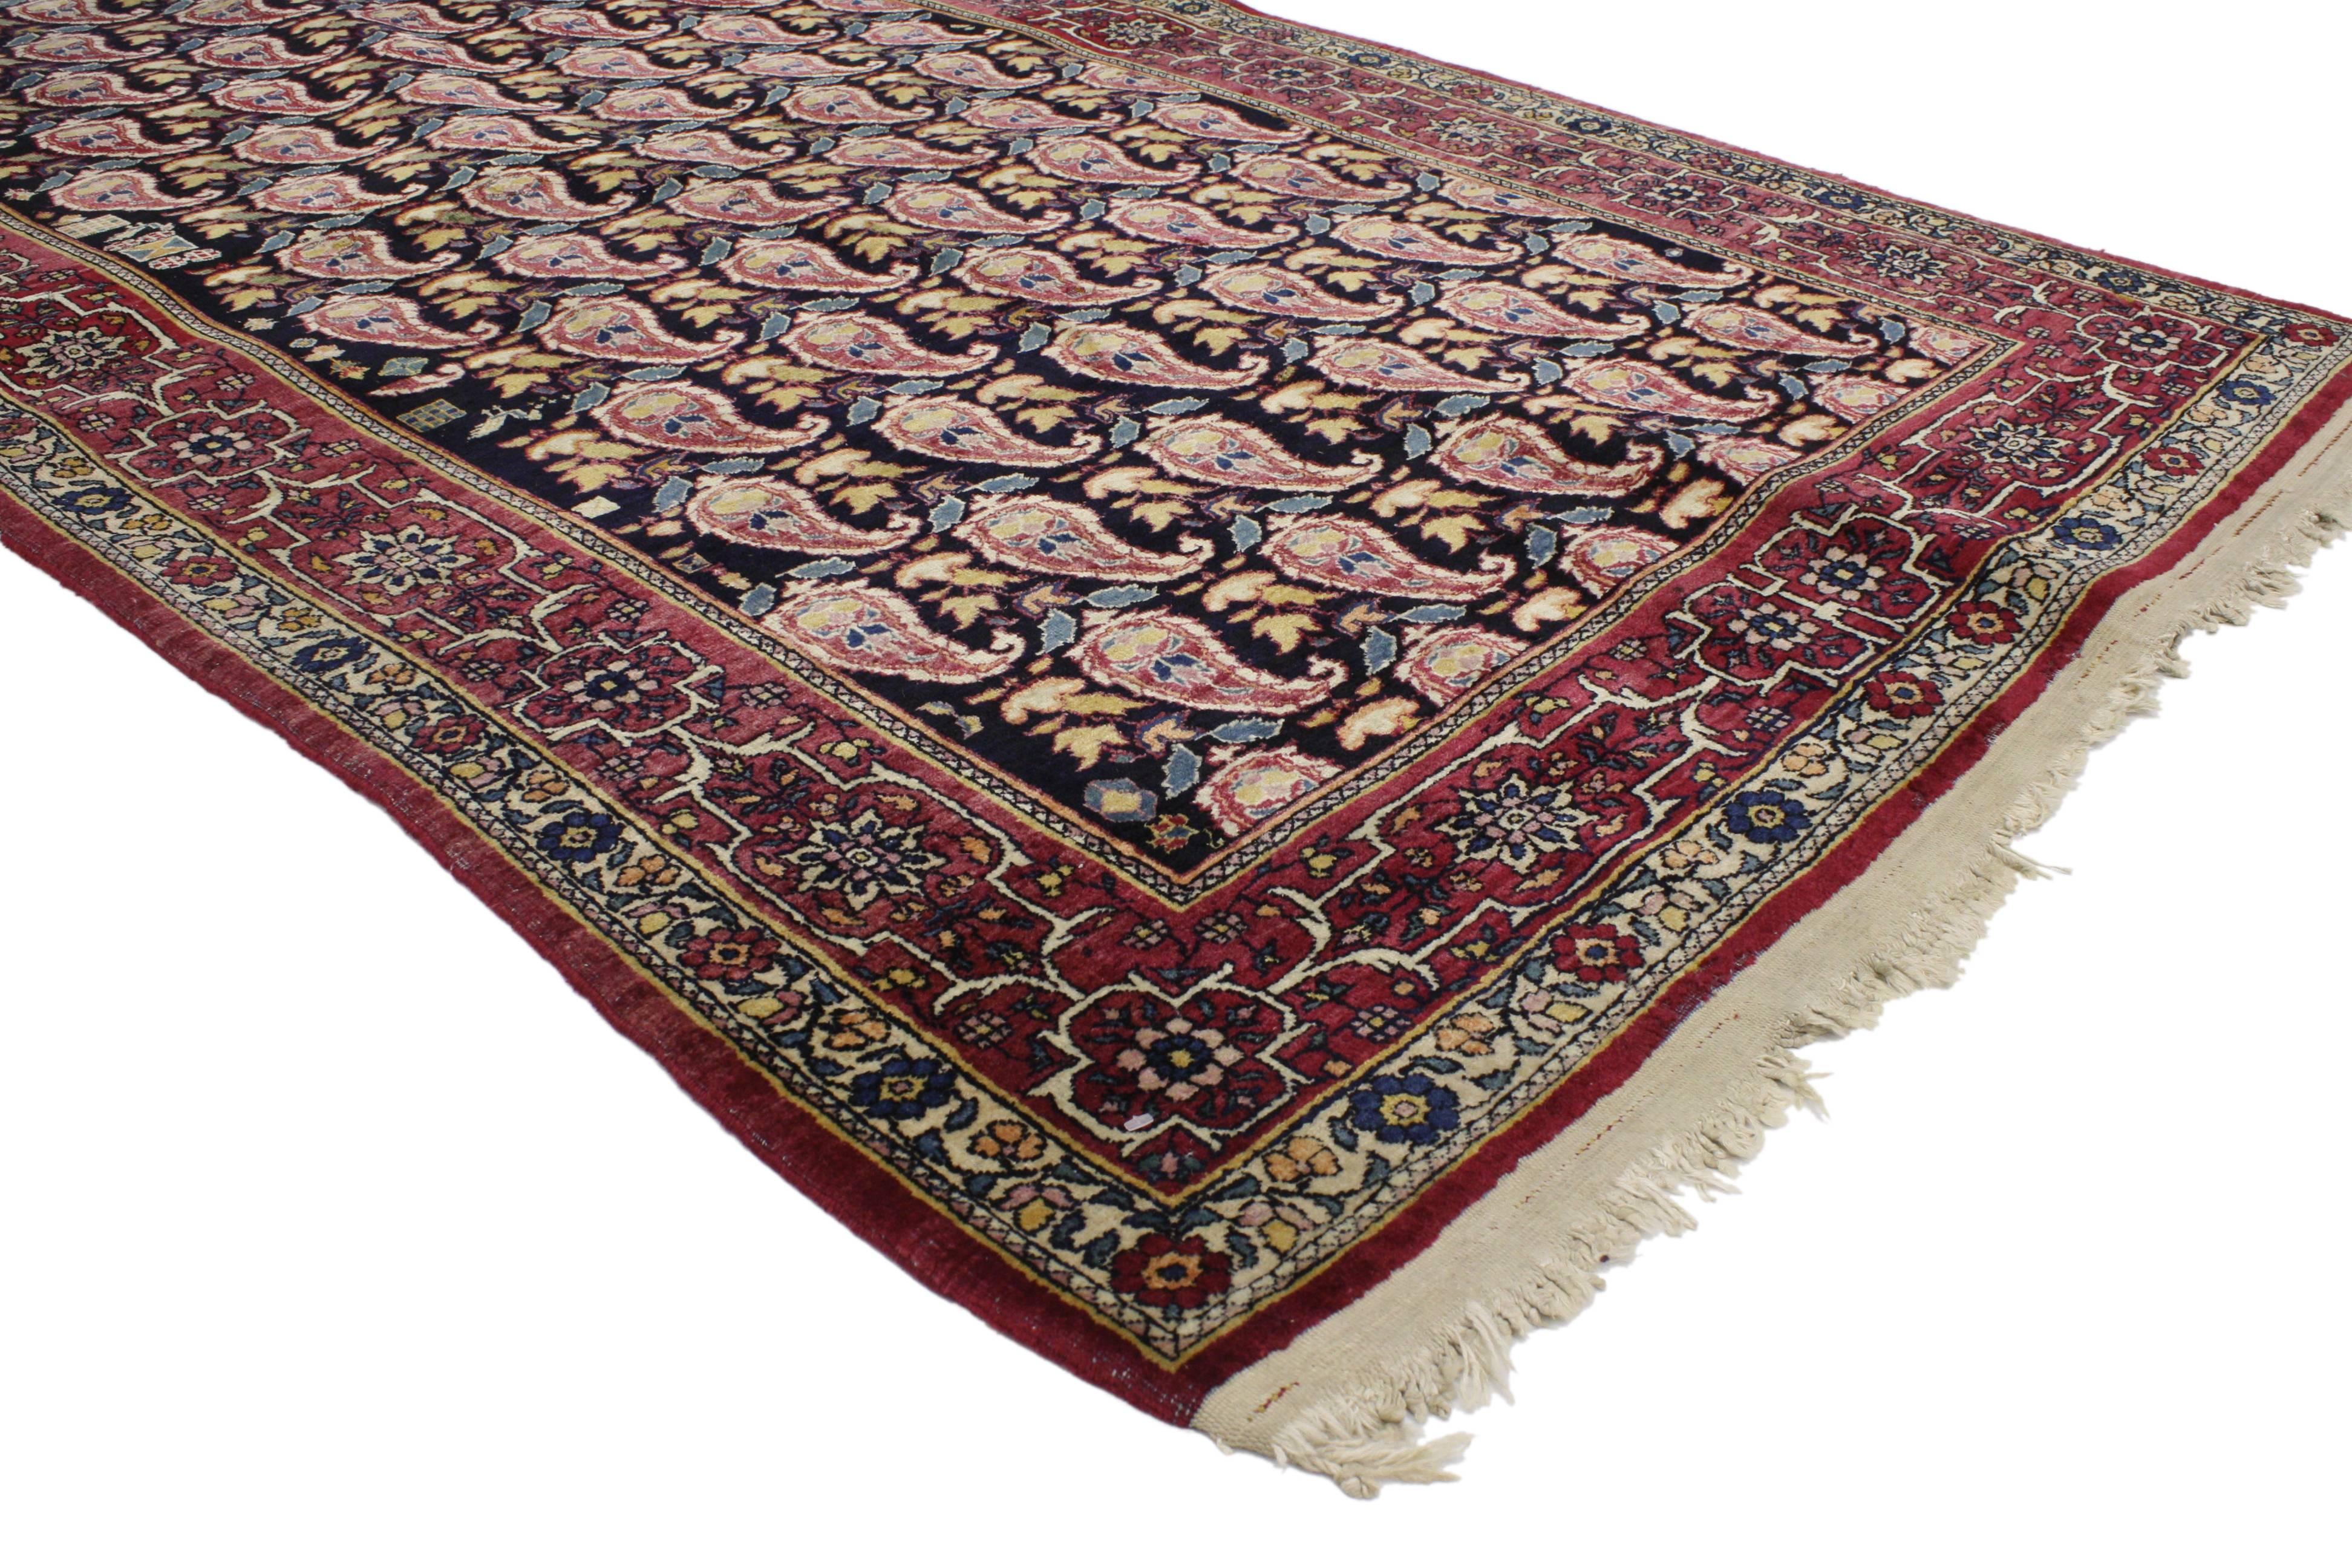 76946 Distressed Antique Persian Kerman Rug with All-Over Boteh Pattern 04’01 x 08’11. Modest yet full of character, this antique Kerman (Kirman) rug with traditional modern design displays an all-over repetitive pattern of symbolic boteh motifs.